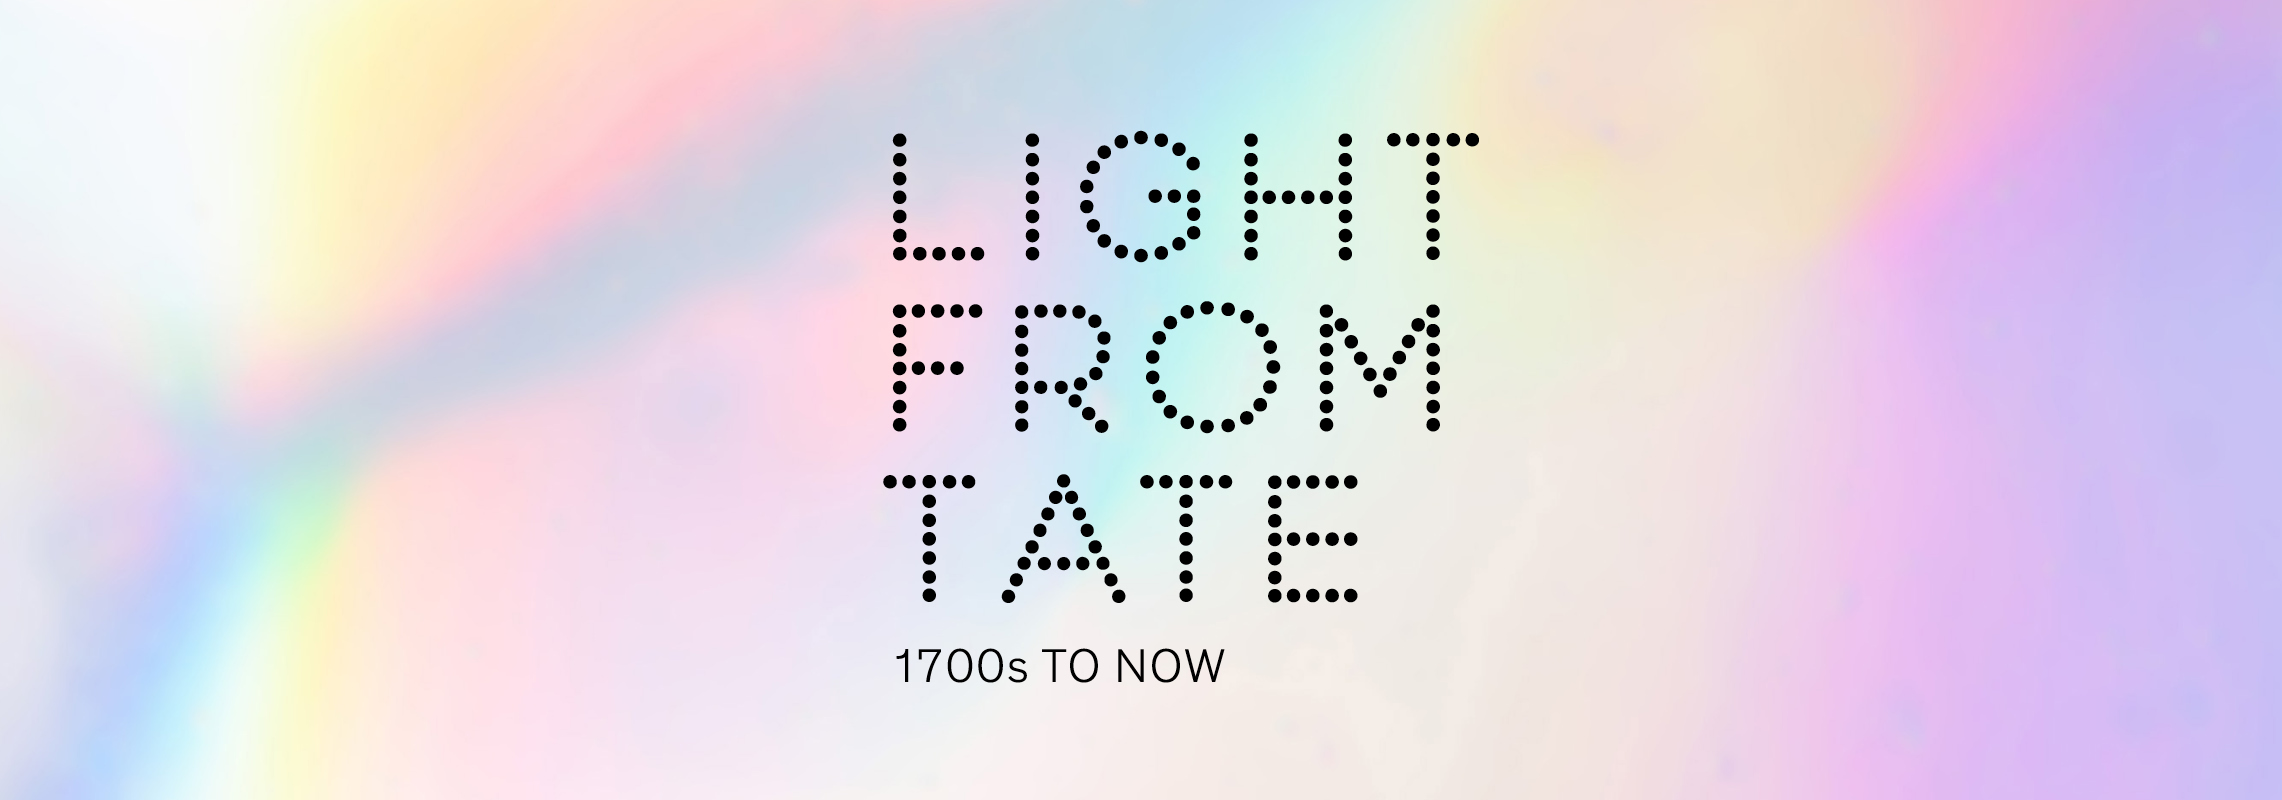 Light from Tate: 1700s to Now